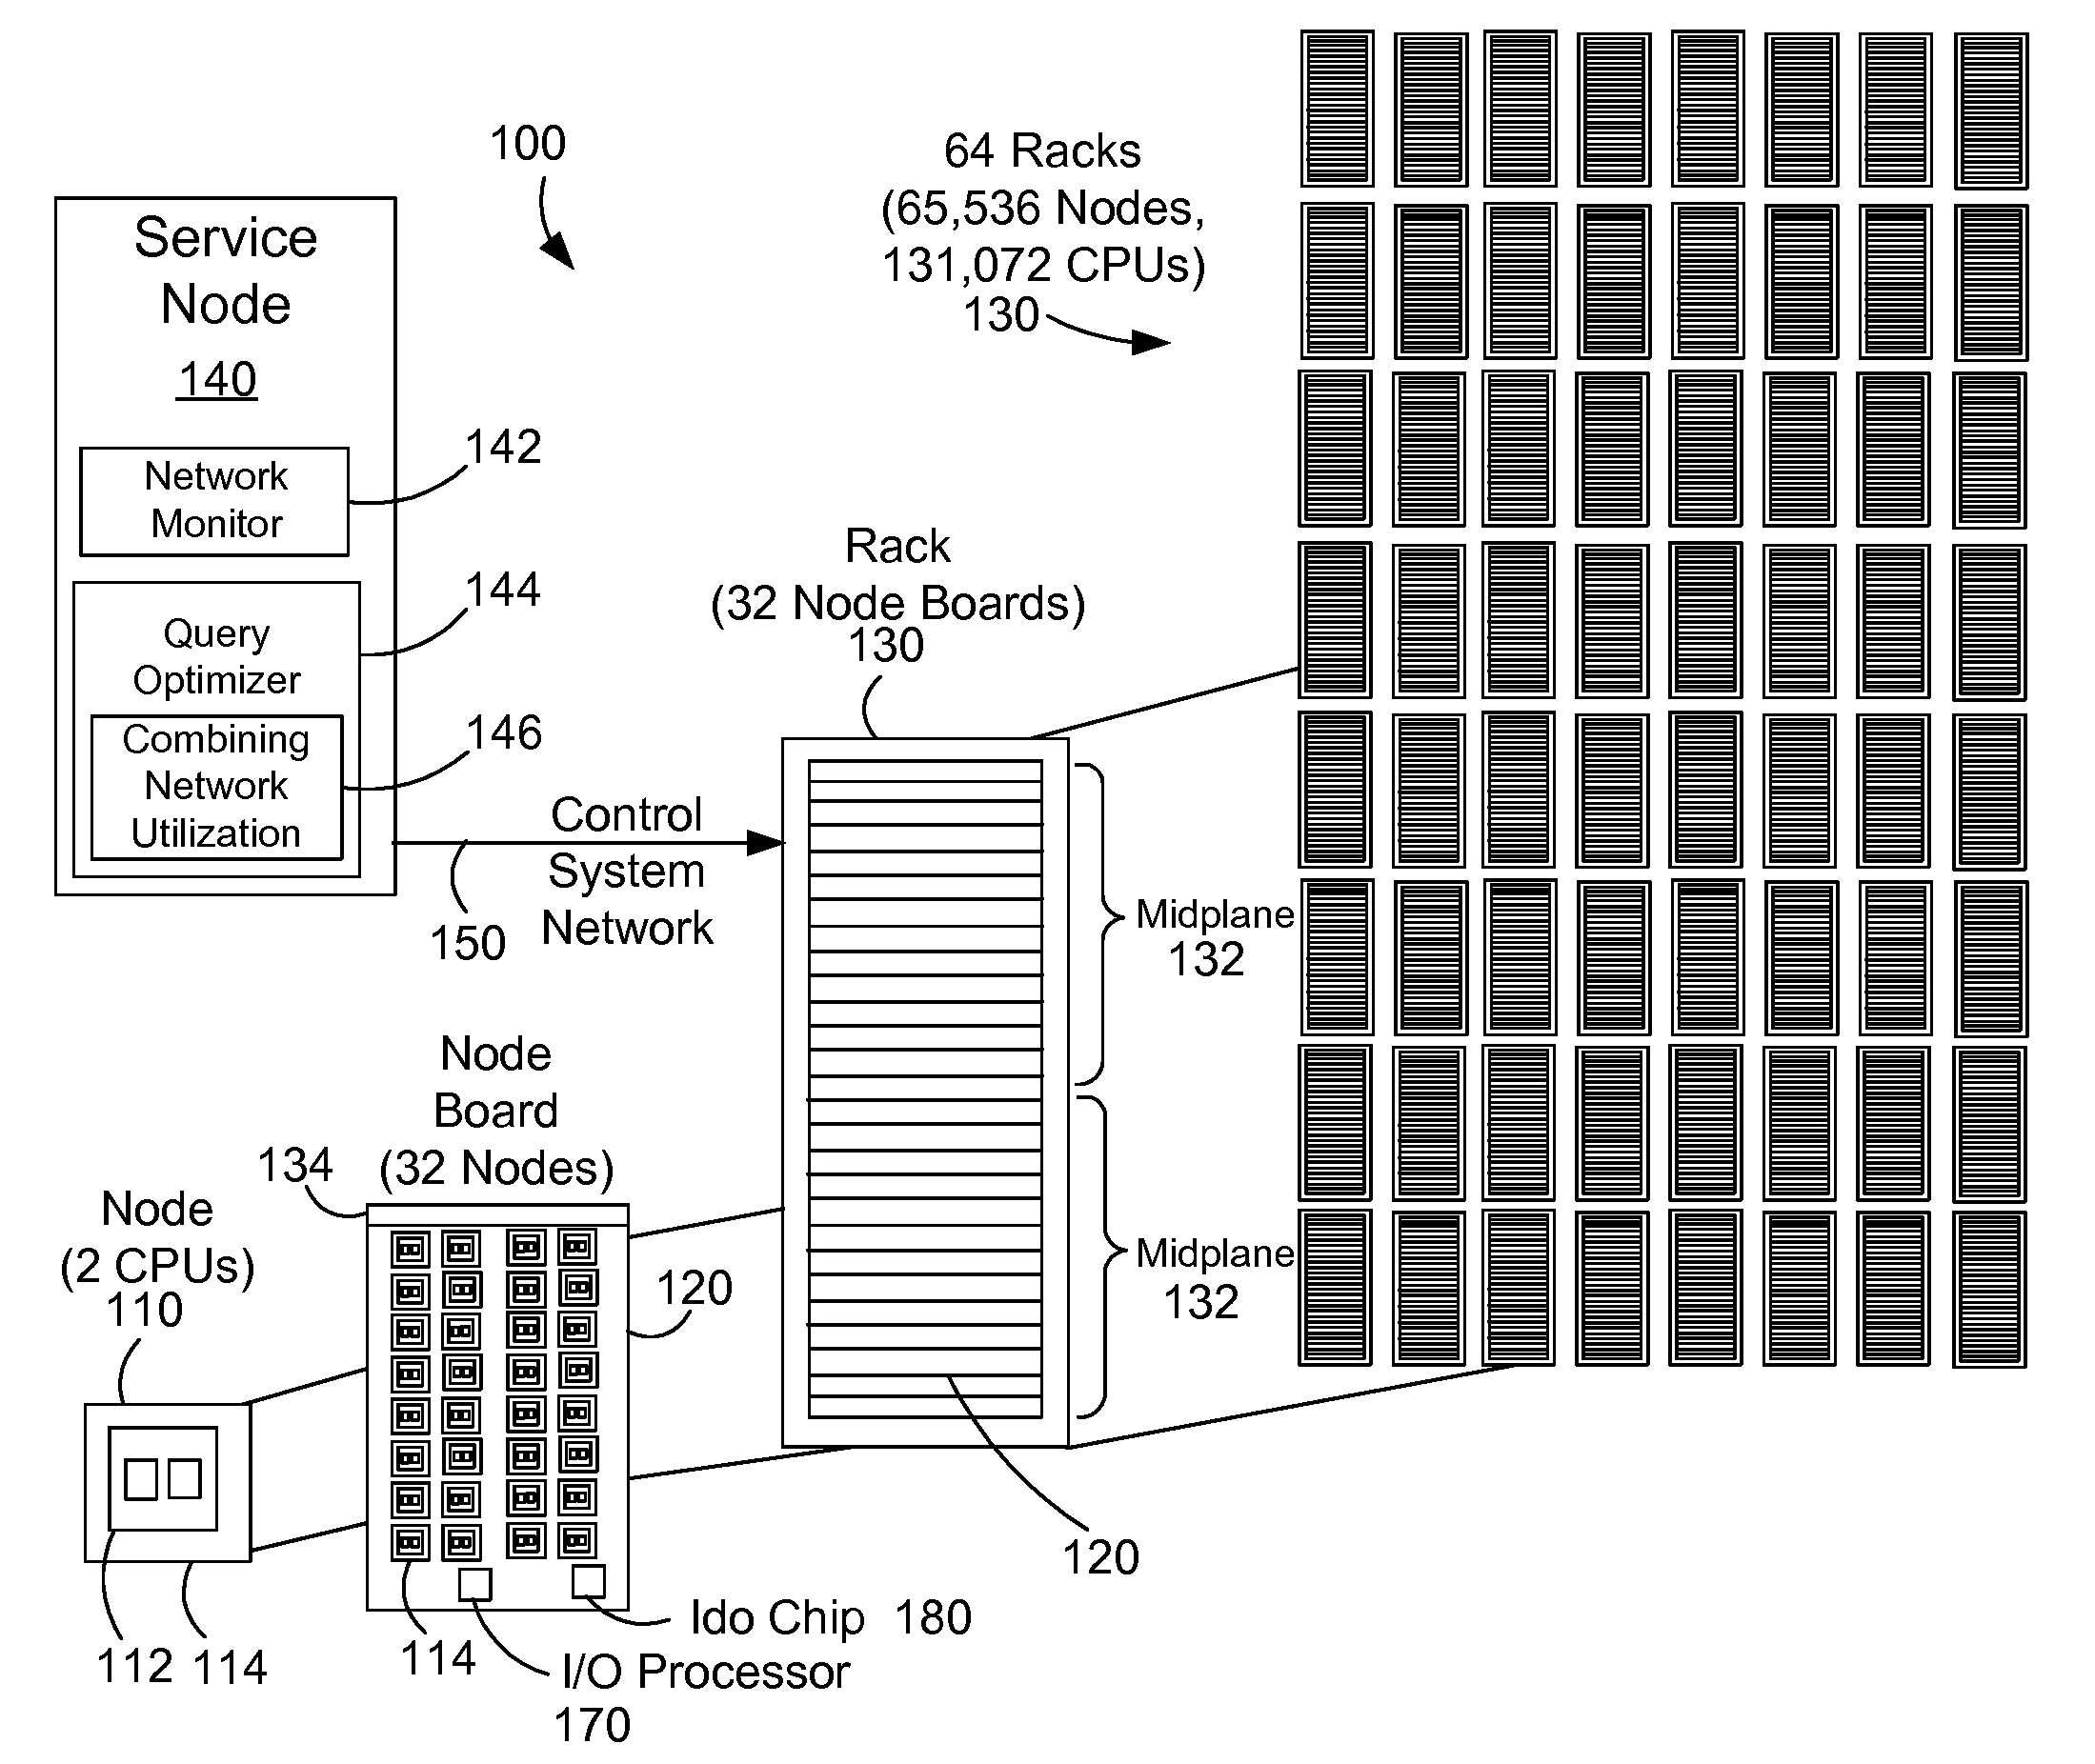 Query Execution and Optimization Utilizing a Combining Network in a Parallel Computer System